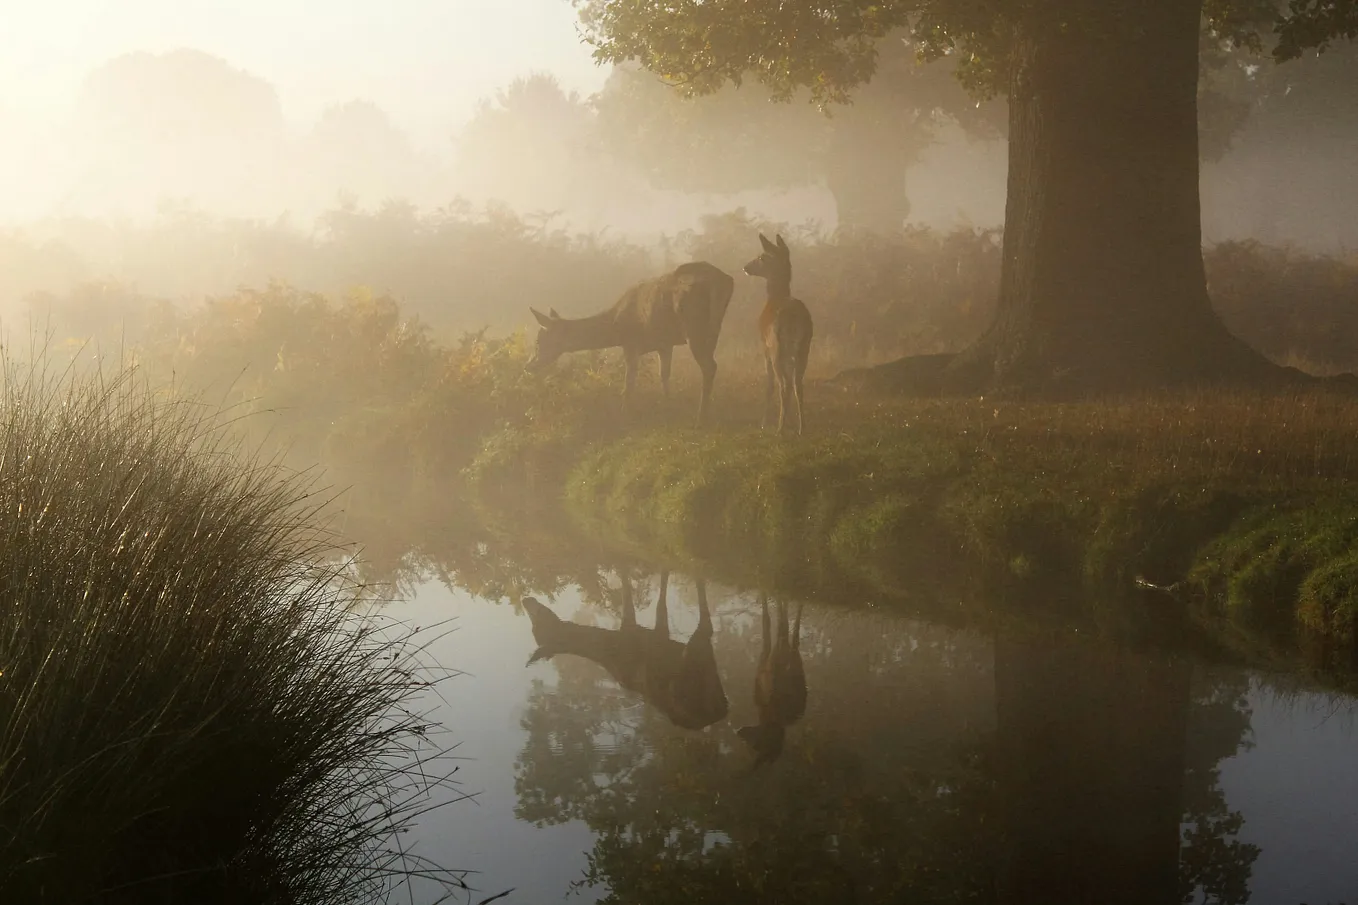 Two deer grazing on grass by the river, with fog gracing the morning.